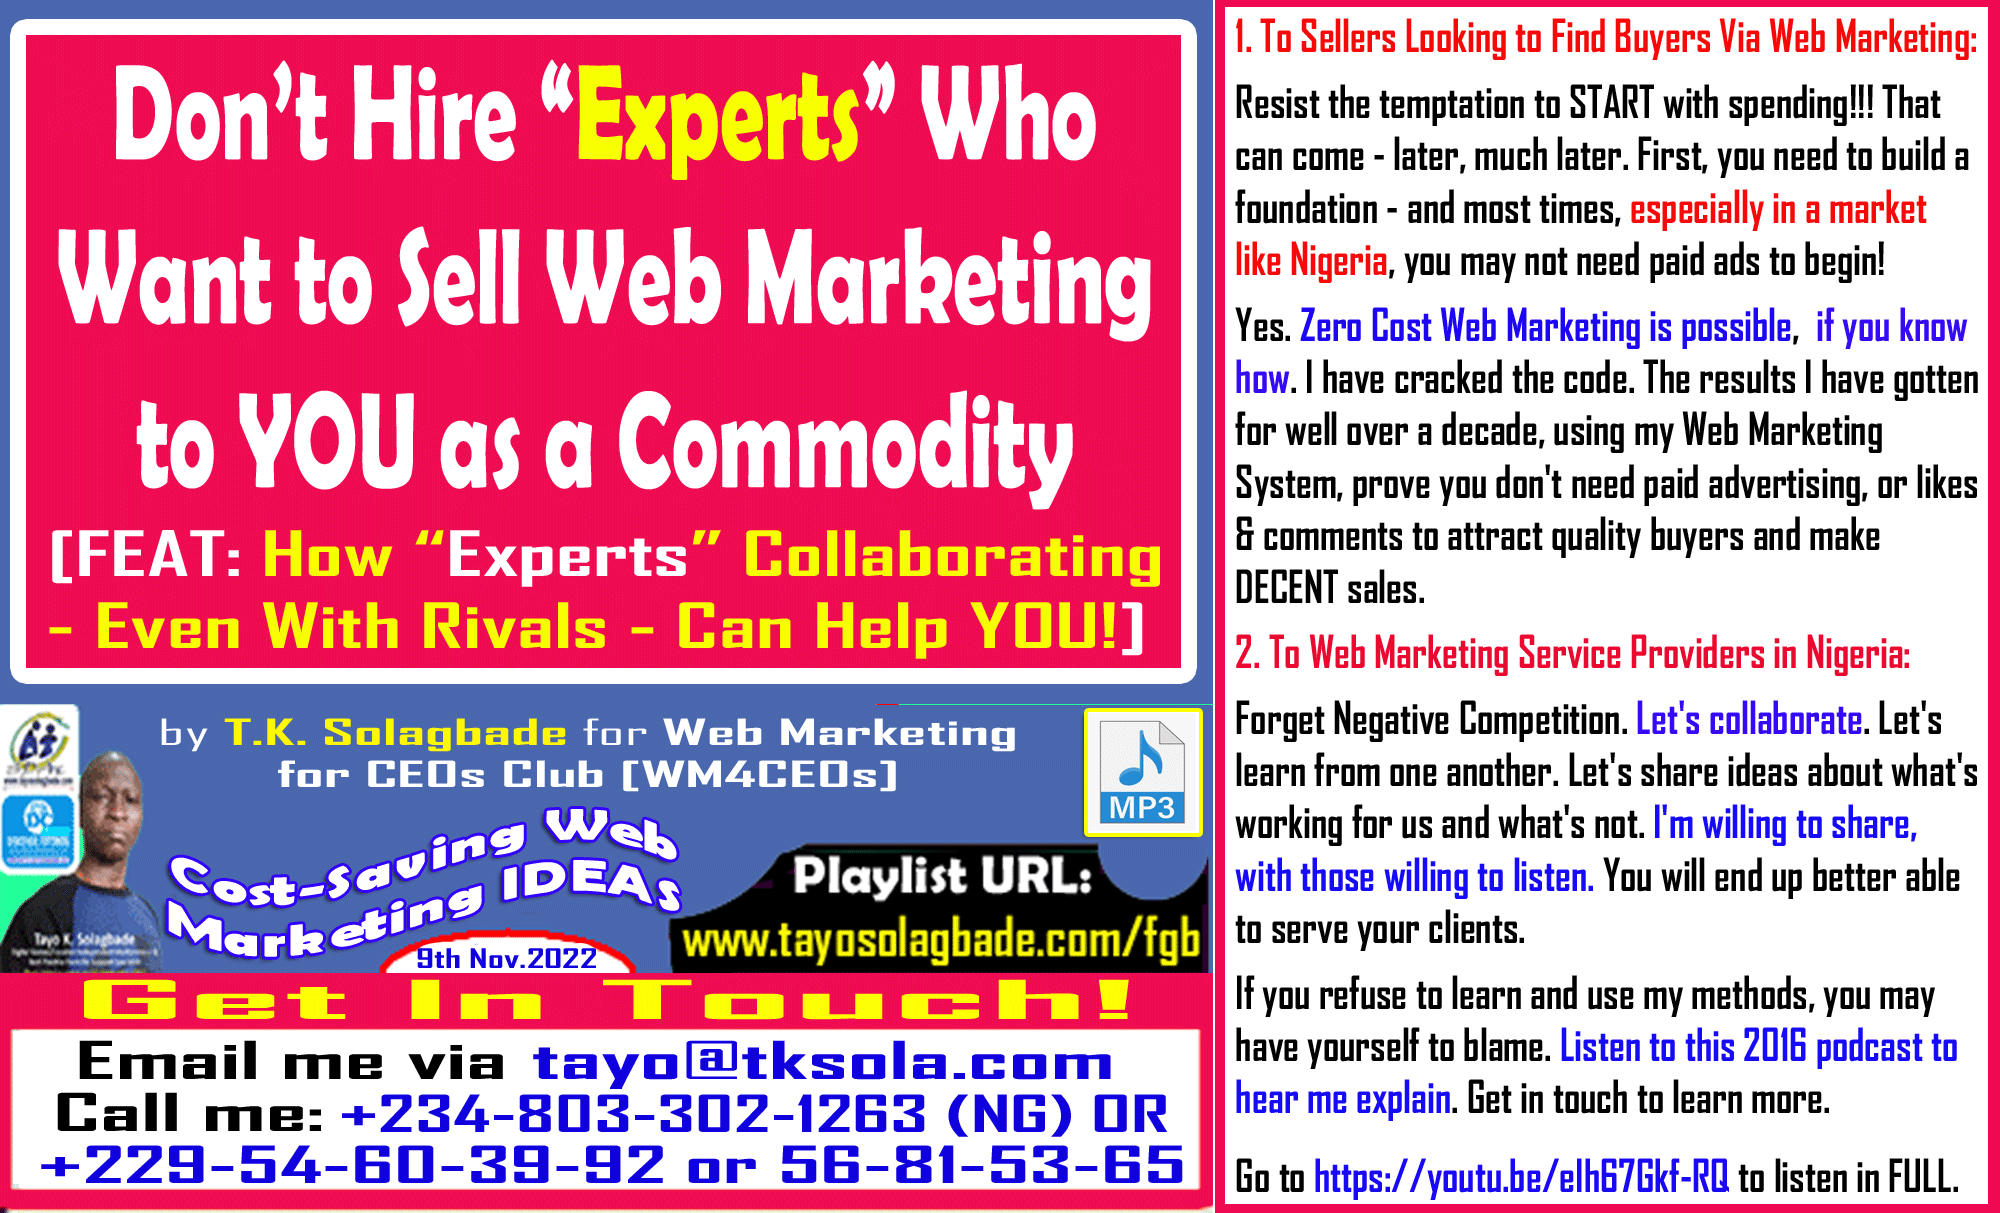 Don’t Hire “Experts” Who Want to Sell Web Marketing to YOU as a Commodity